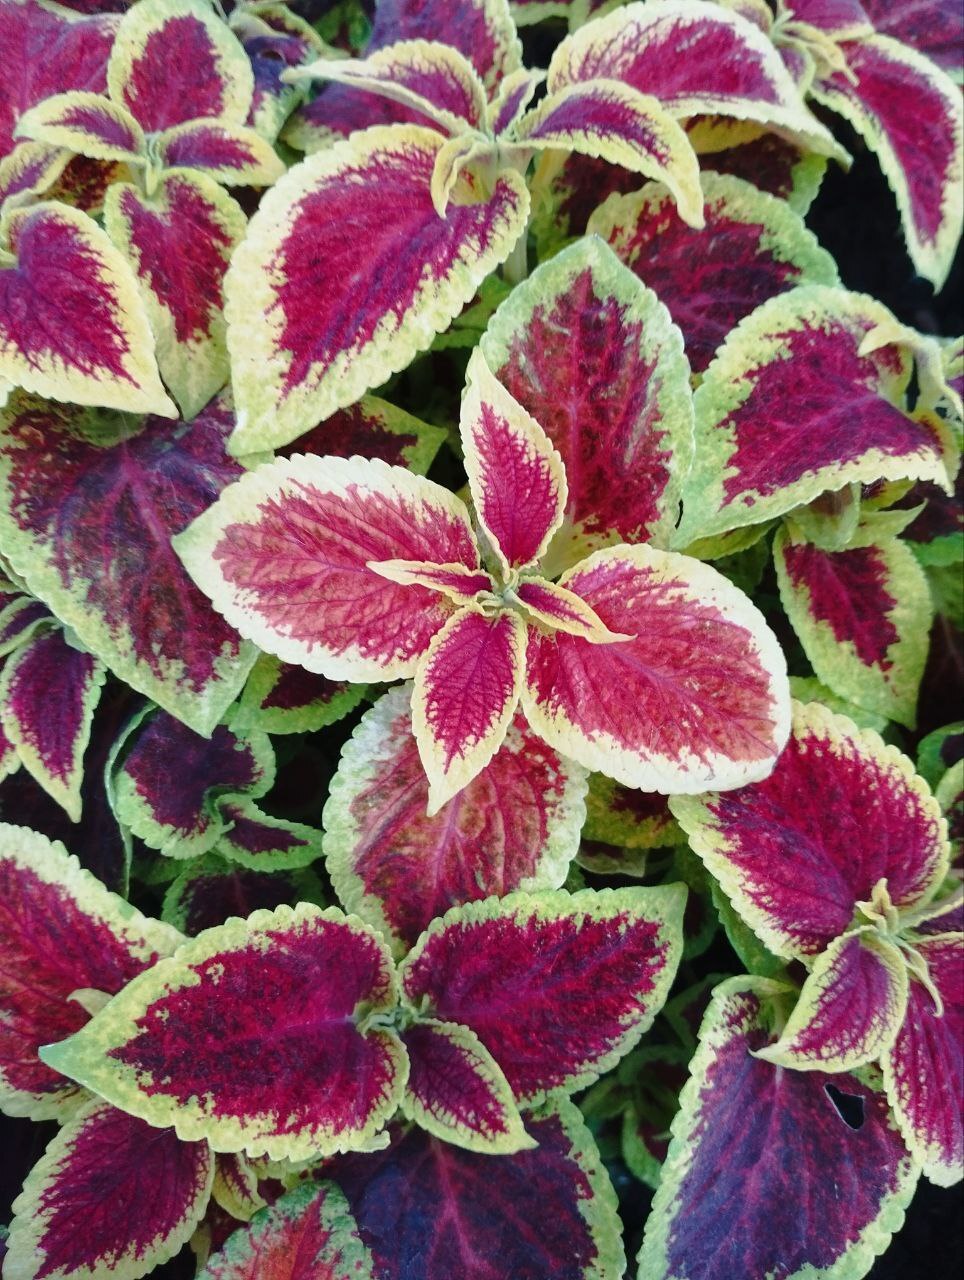 Got an interesting comb - Crossposting, Pikabu publish bot, Coleus, Flower bed, The photo